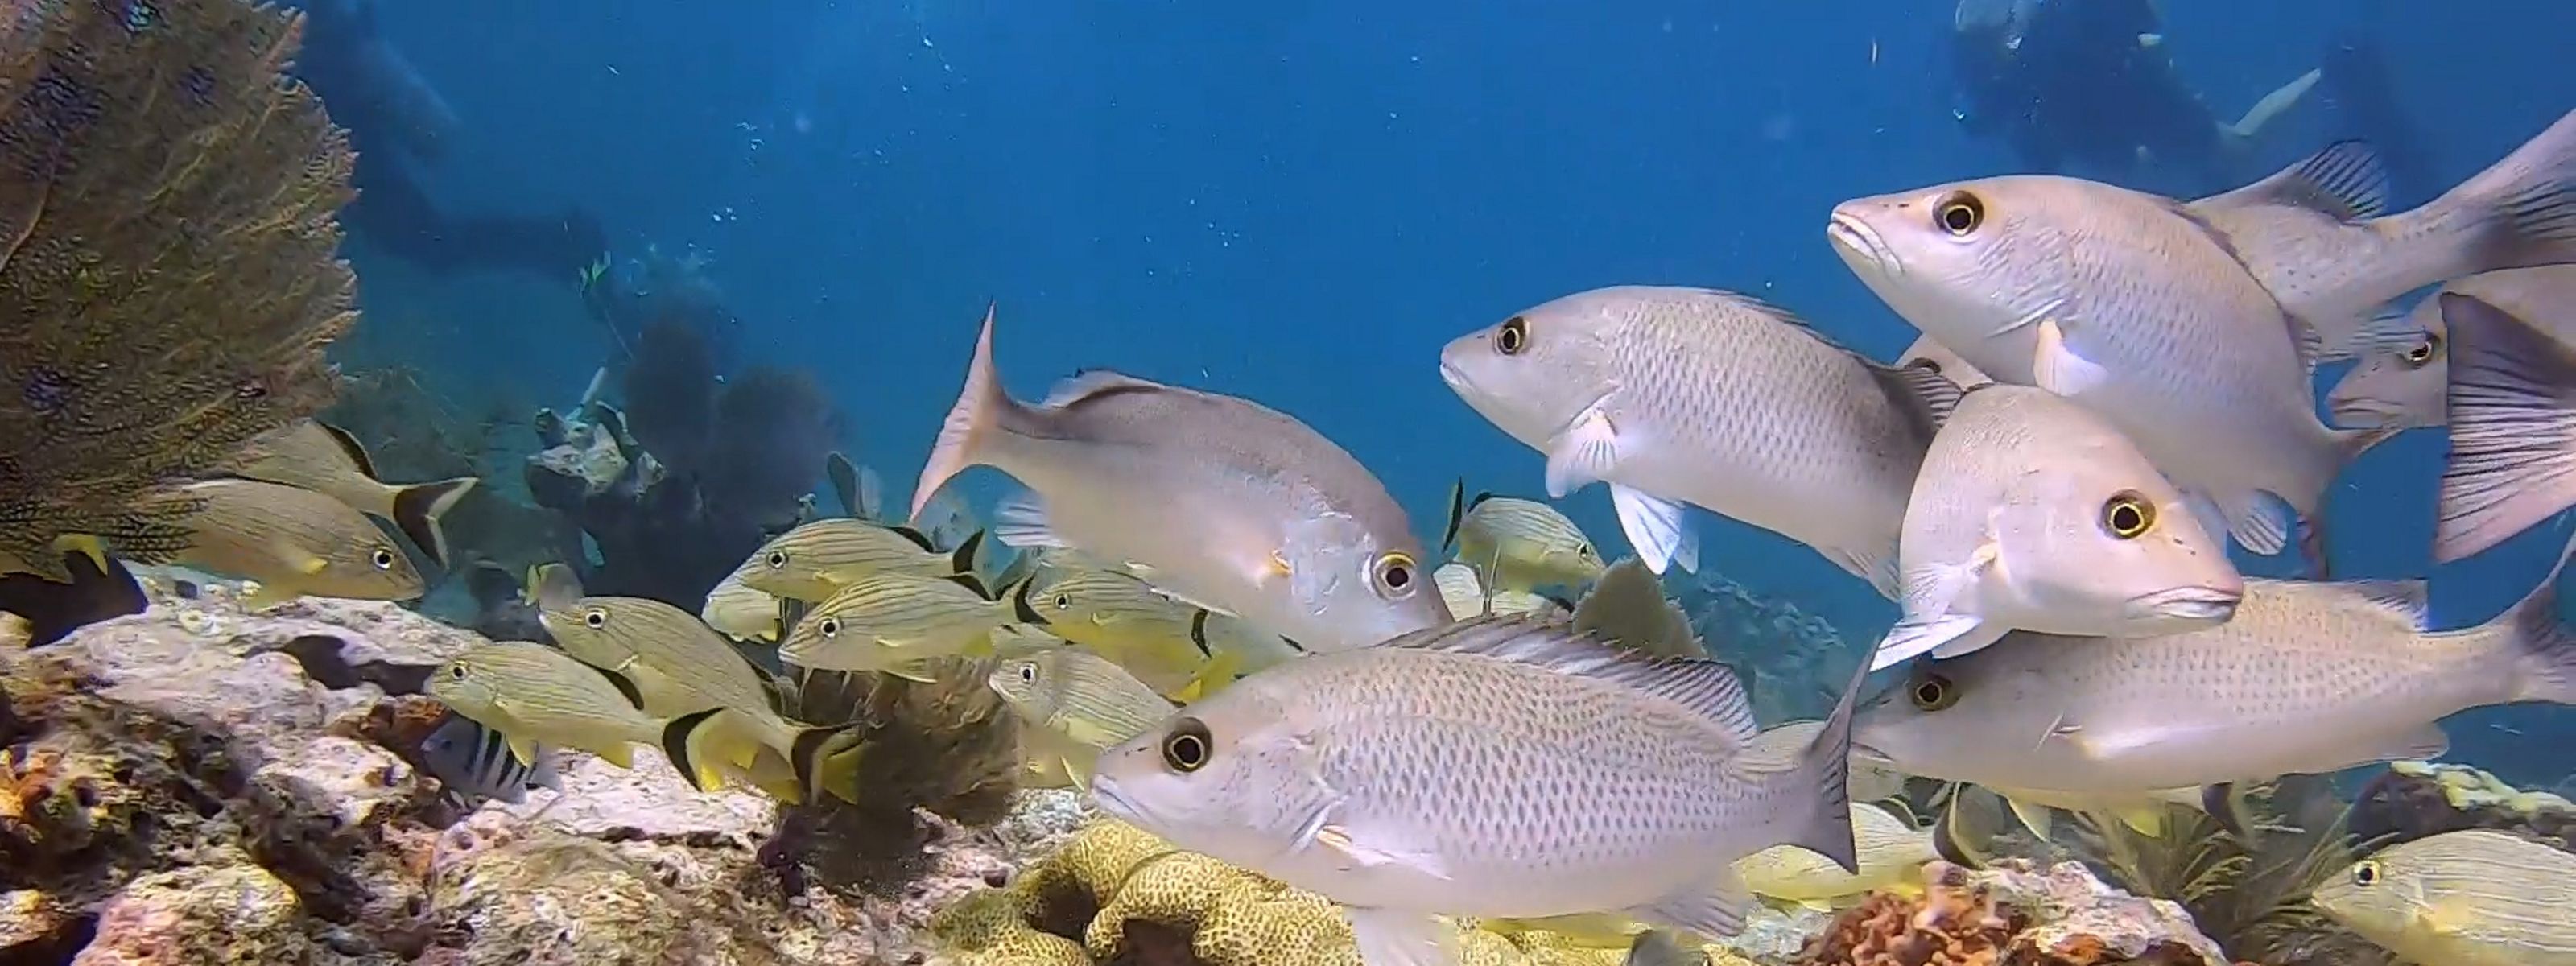 Gray snappers and other reef fish swimming in the clear blue waters of the Florida Keys.